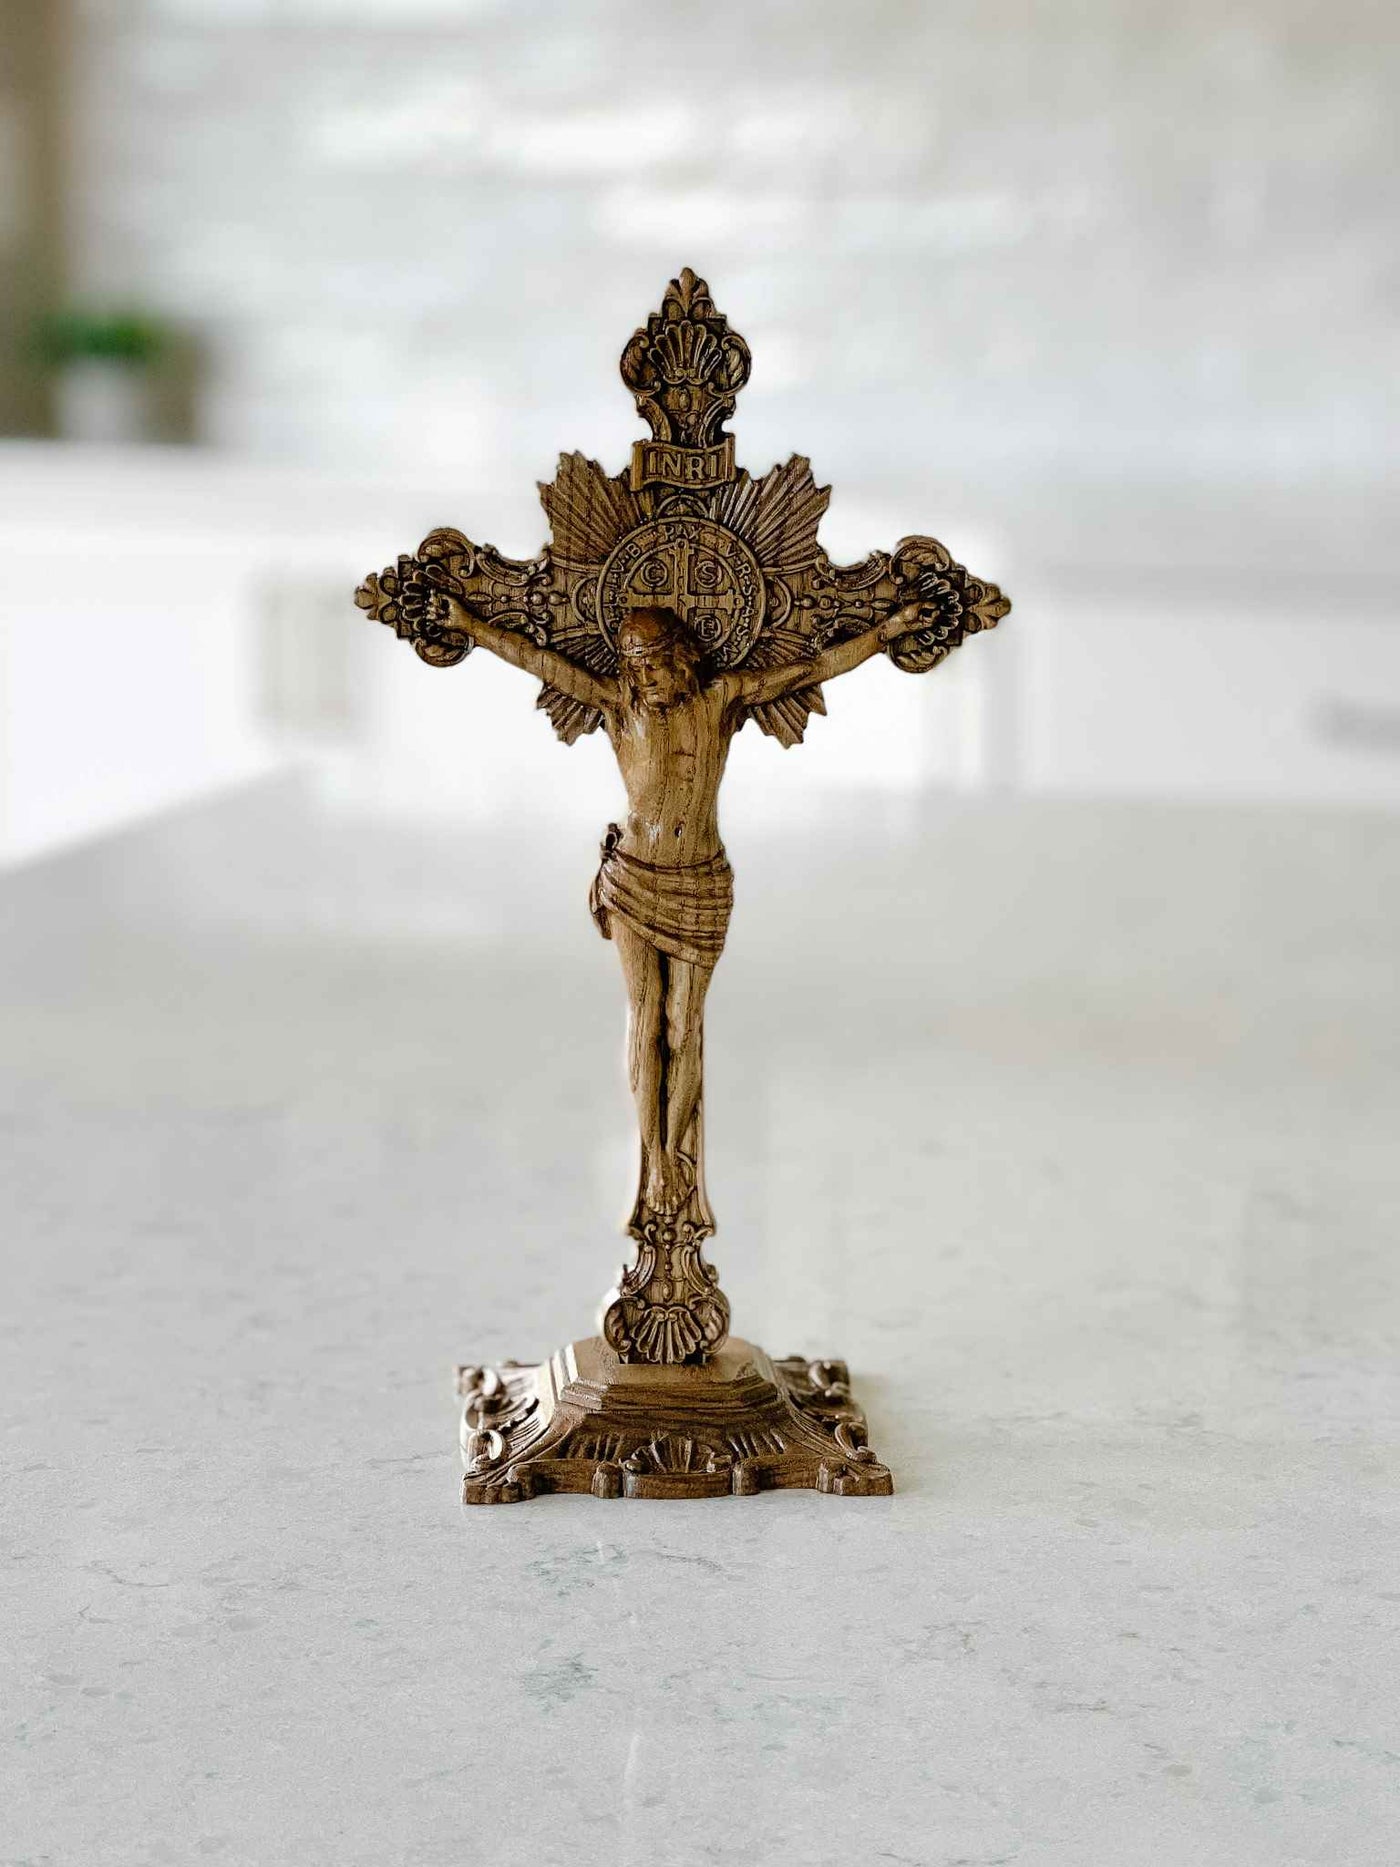 Carved Wooden Crucifix - with Base